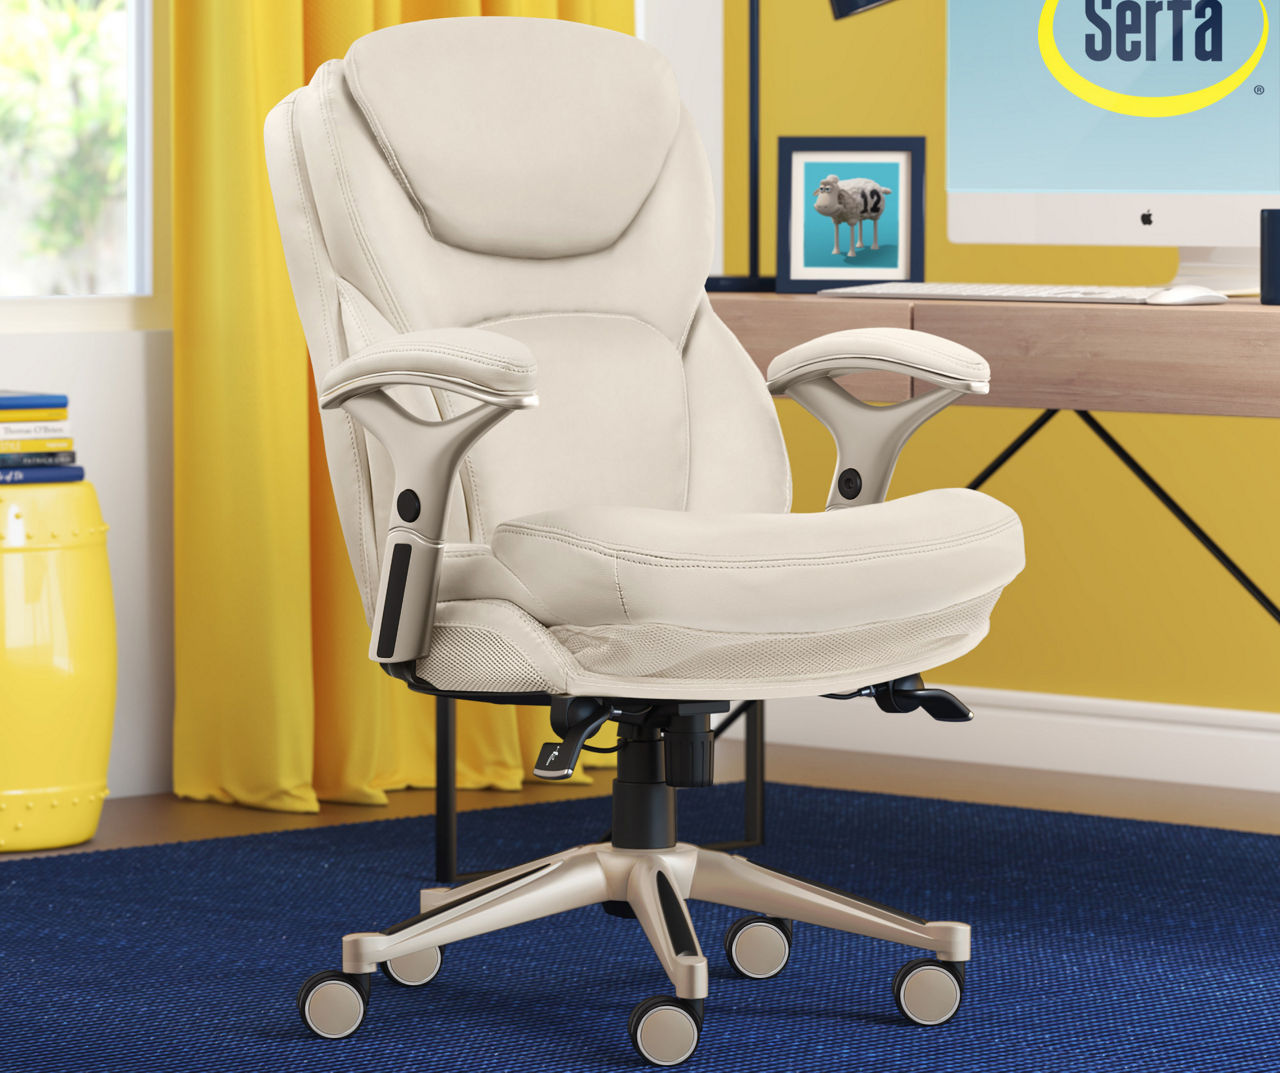 Serta Claremont Ivory Bonded Leather Office Chair | Big Lots